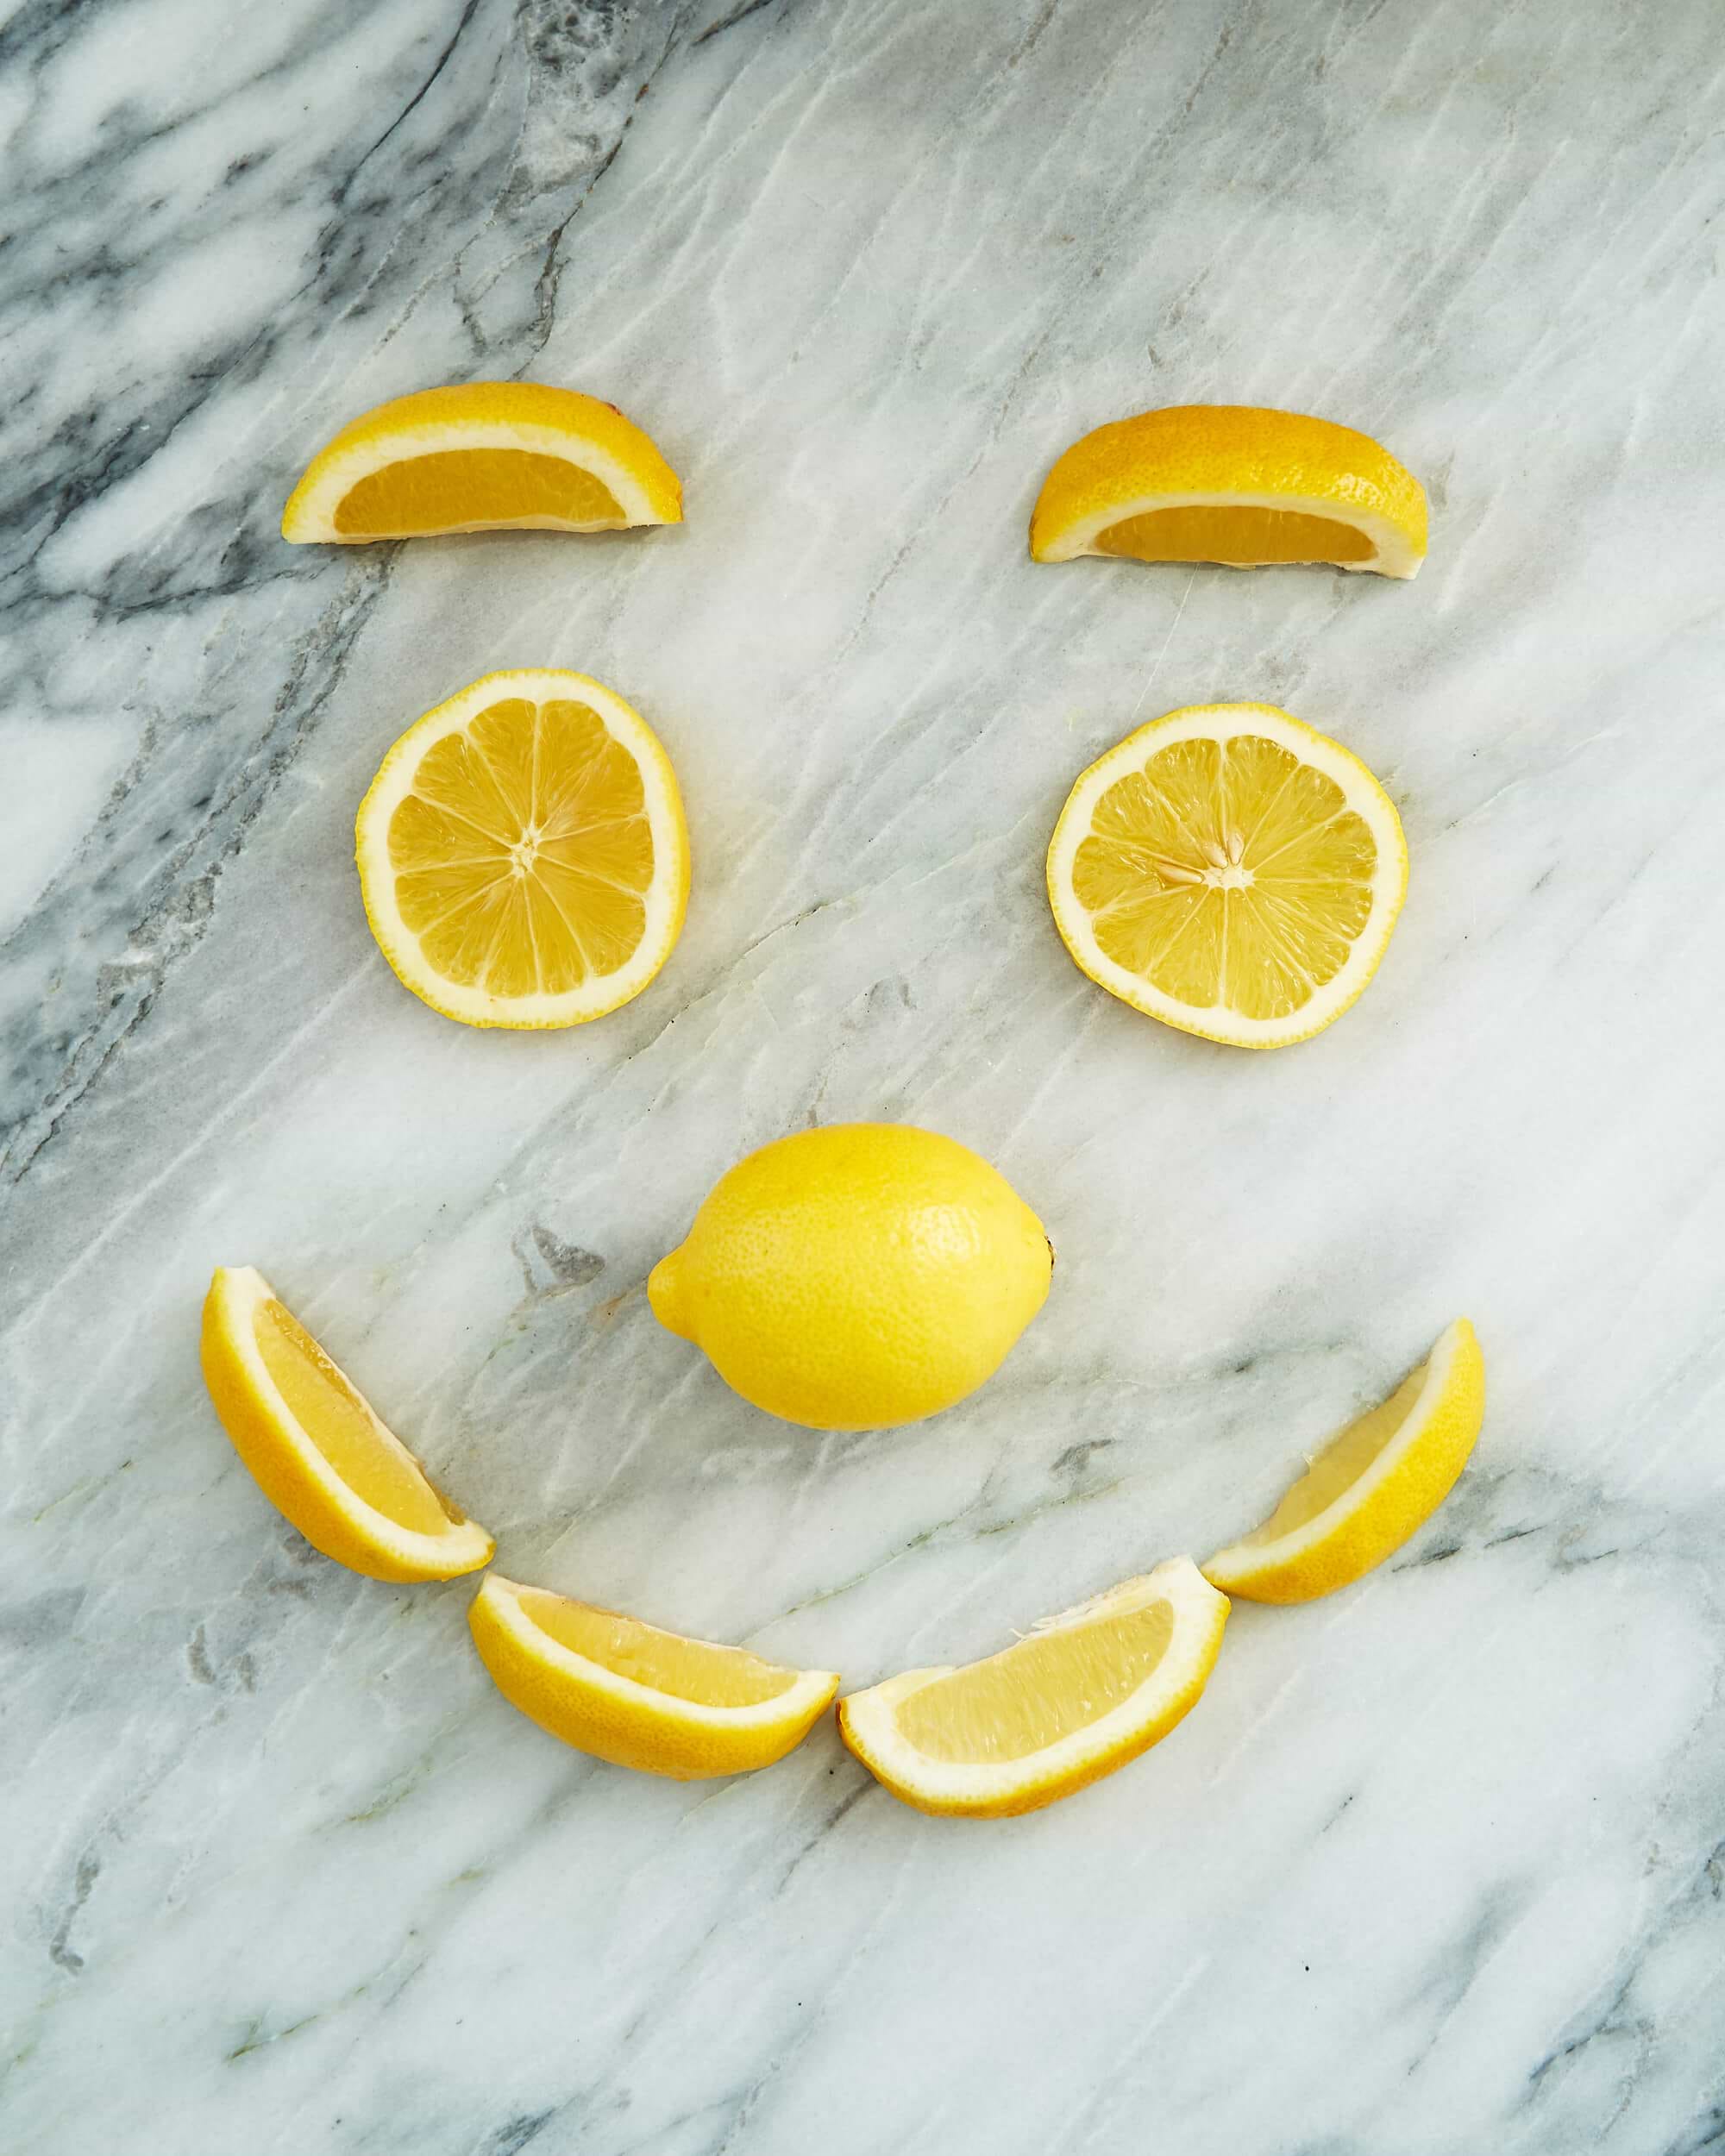 Lemons cut and displayed on a marble counter